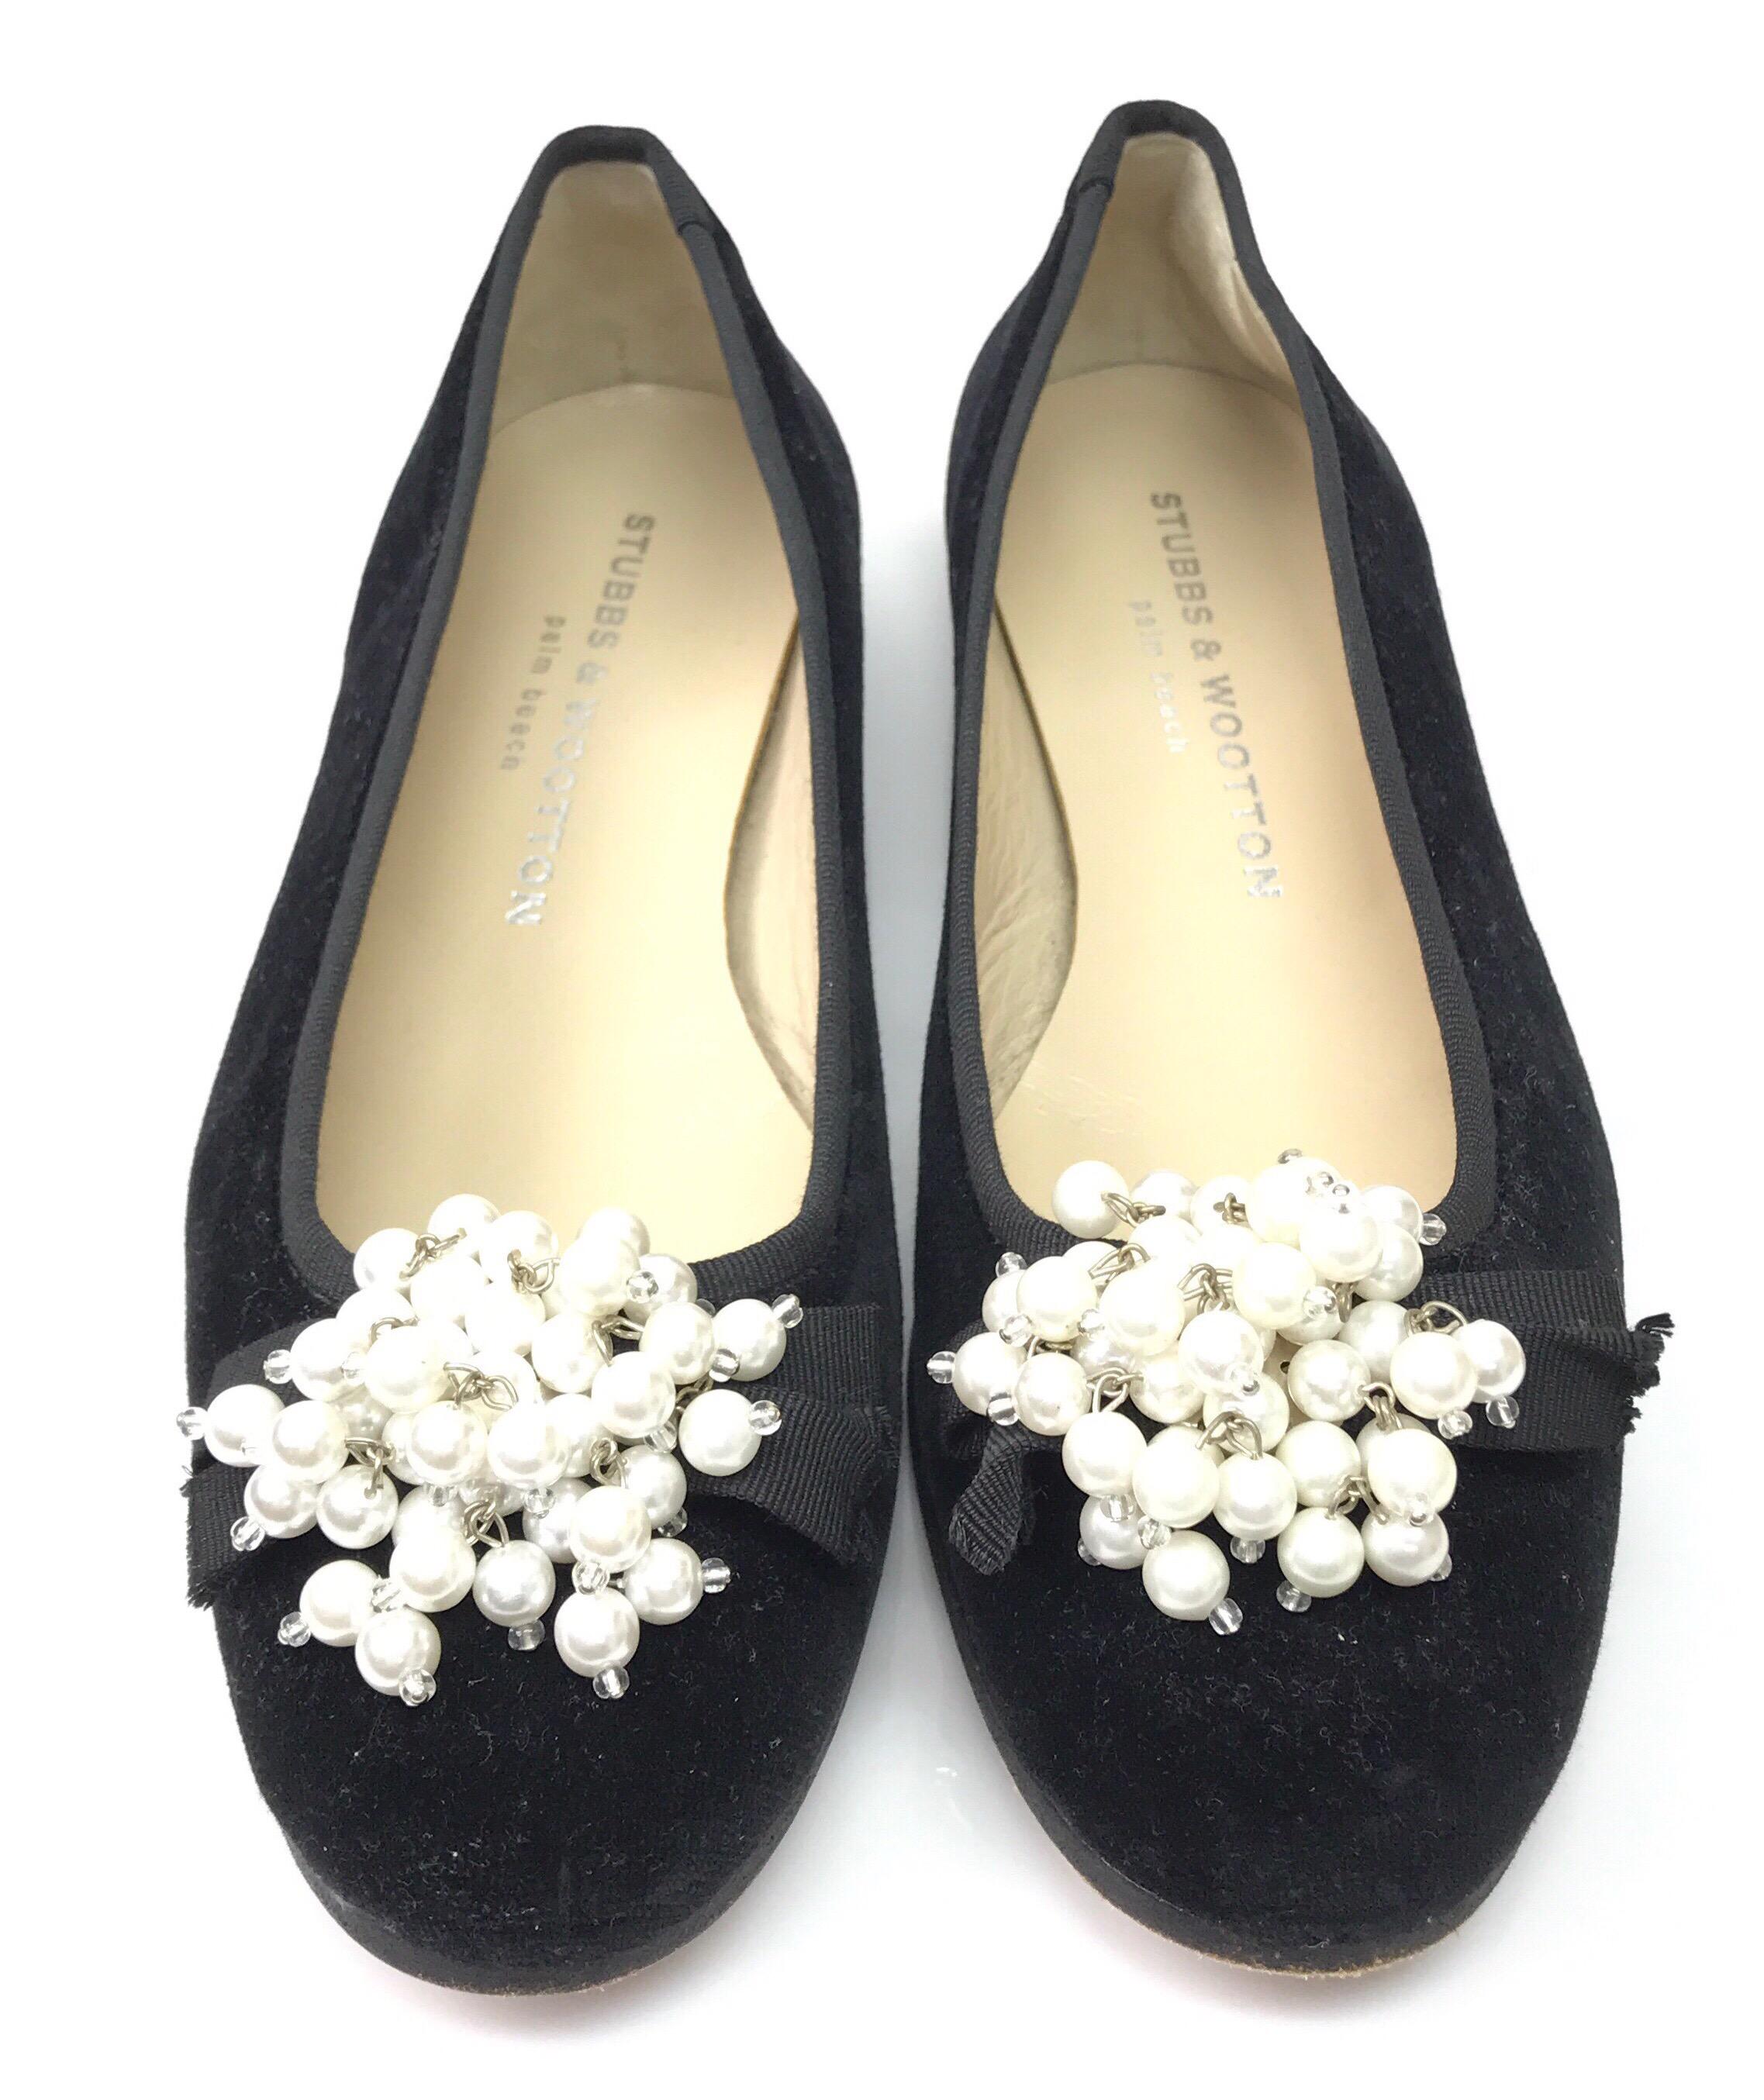 Stubbs & Wooton Black Velvet Ballerina flats w/ pearl cluster-7. These adorable Stubbs & Wootton flats are in great condition. They show minimal sign of use, with exception to the bottom of the shoe. The shoe is made of black velvet and has a ribbon